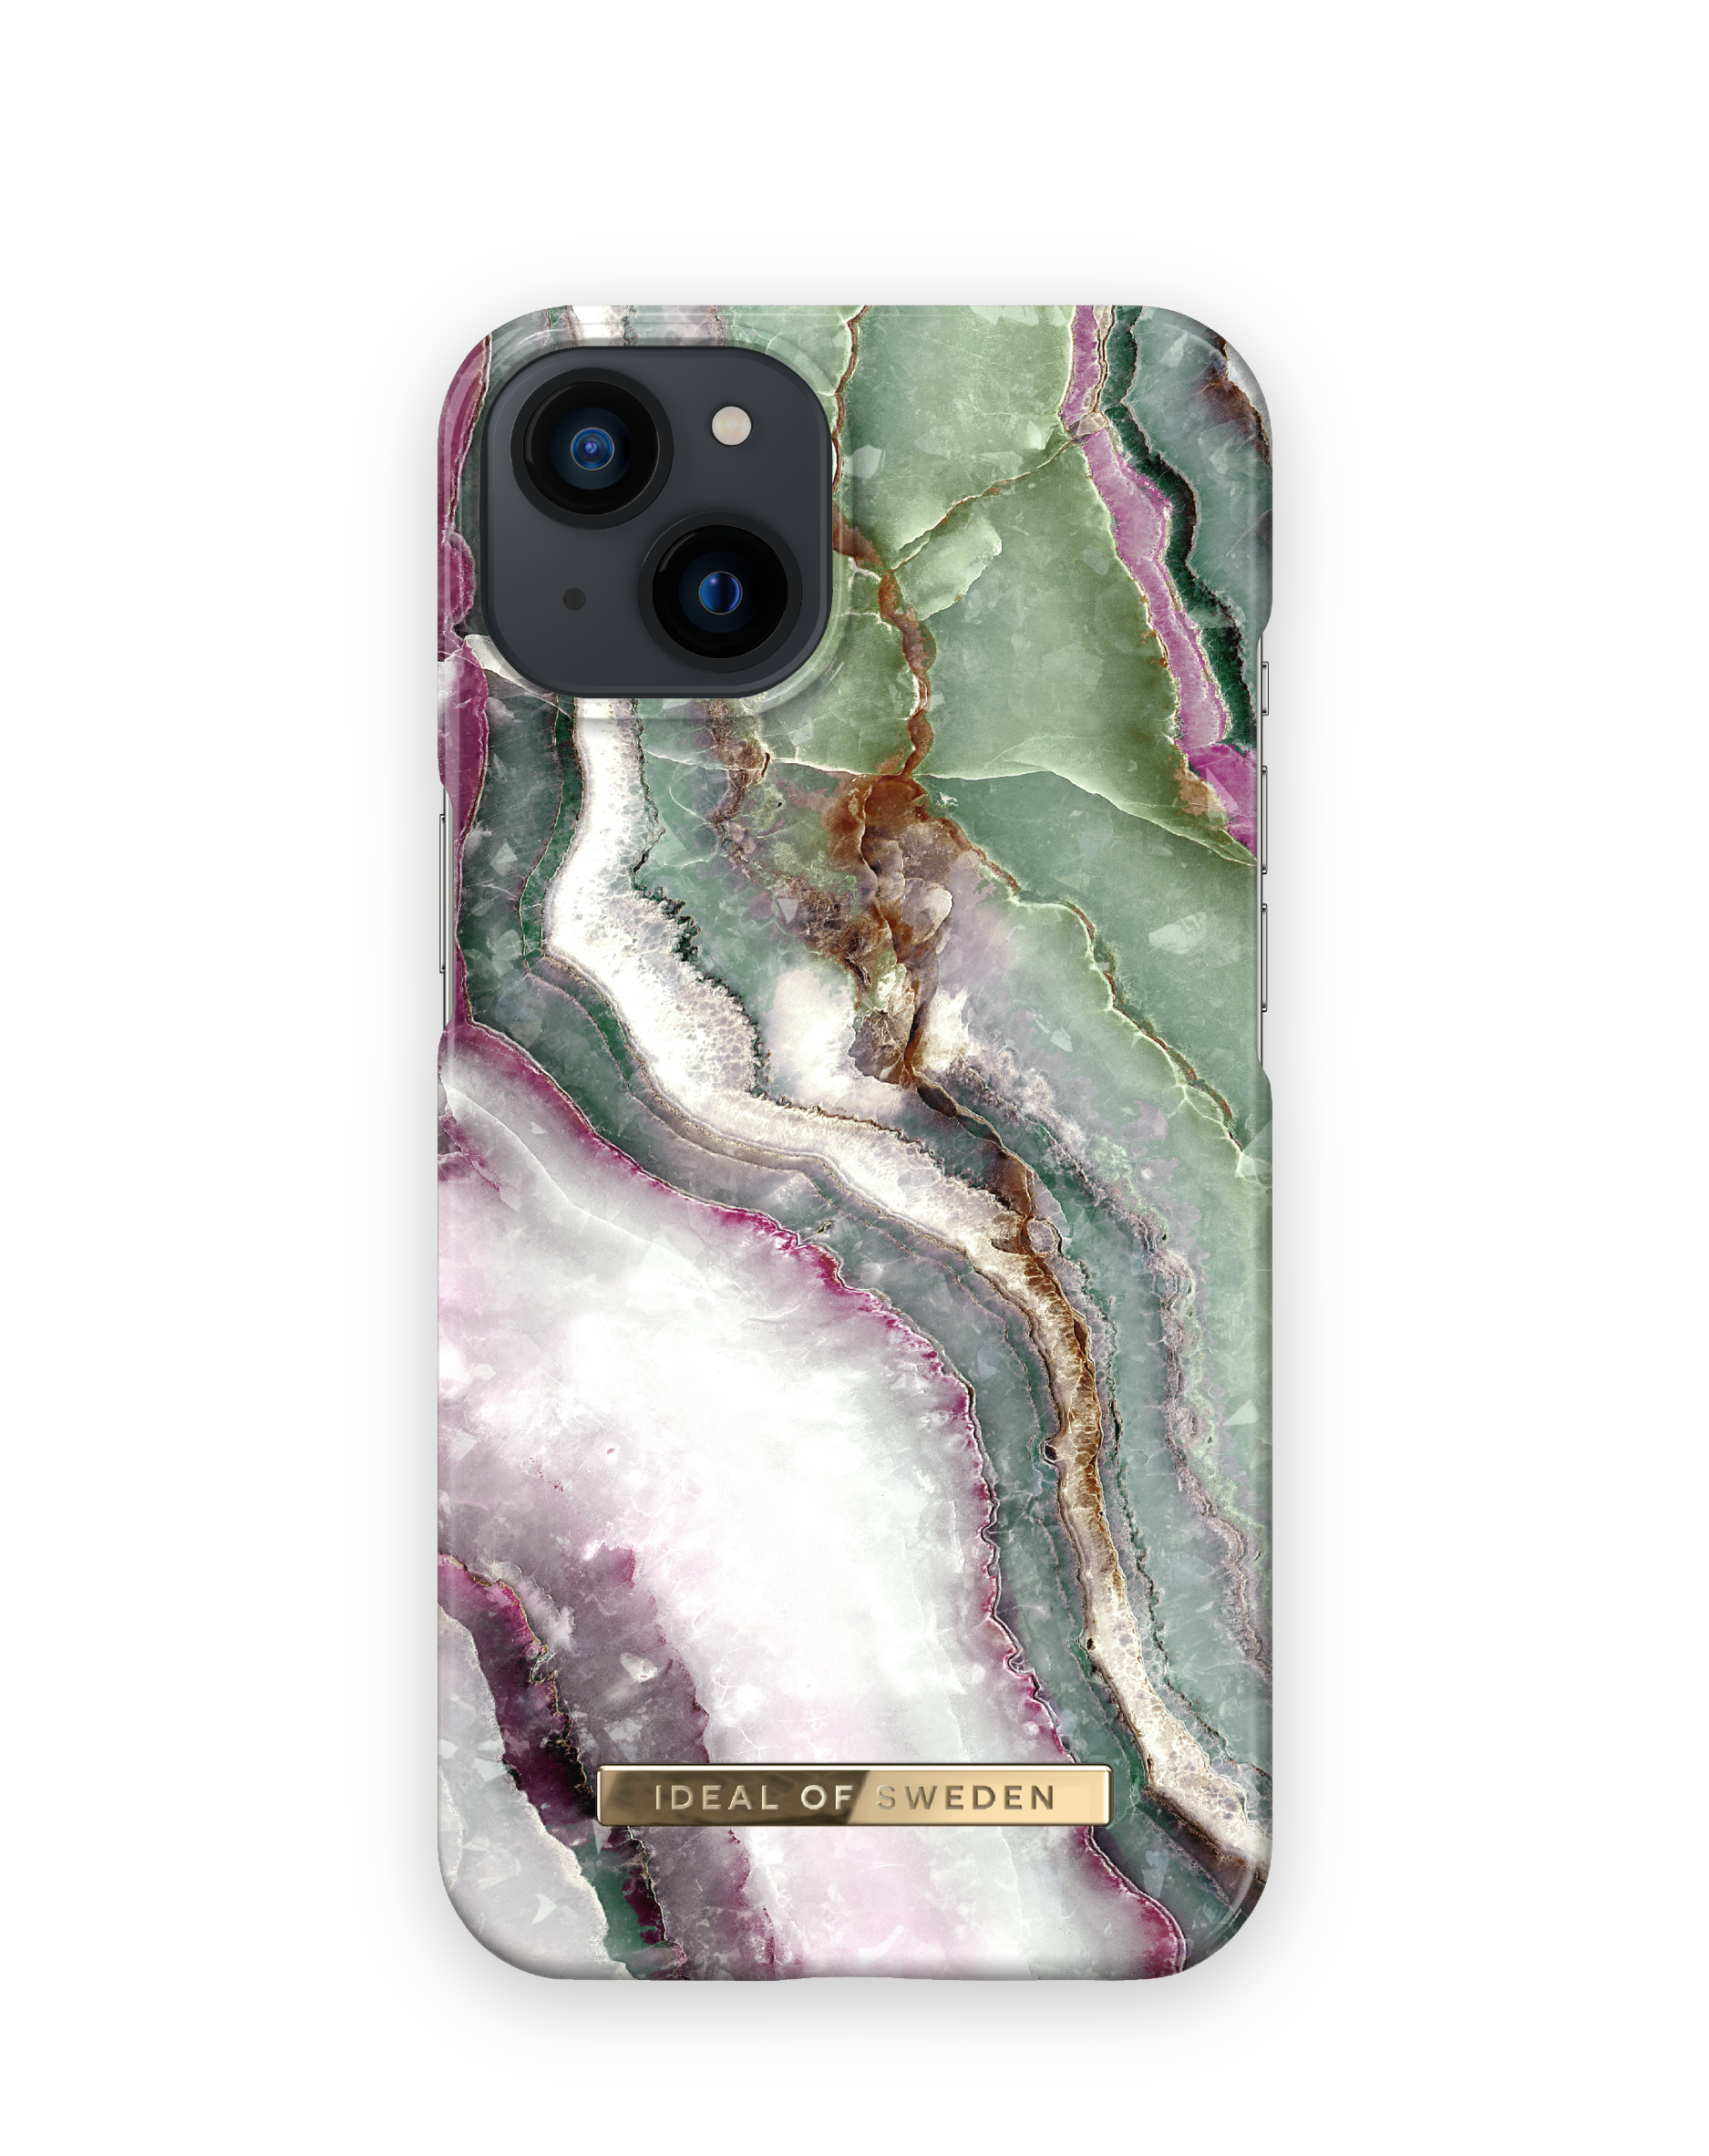 Northern Lights IDFCAG22-I2261-448, Apple, 13, OF iPhone SWEDEN 14; iPhone IDEAL Backcover,